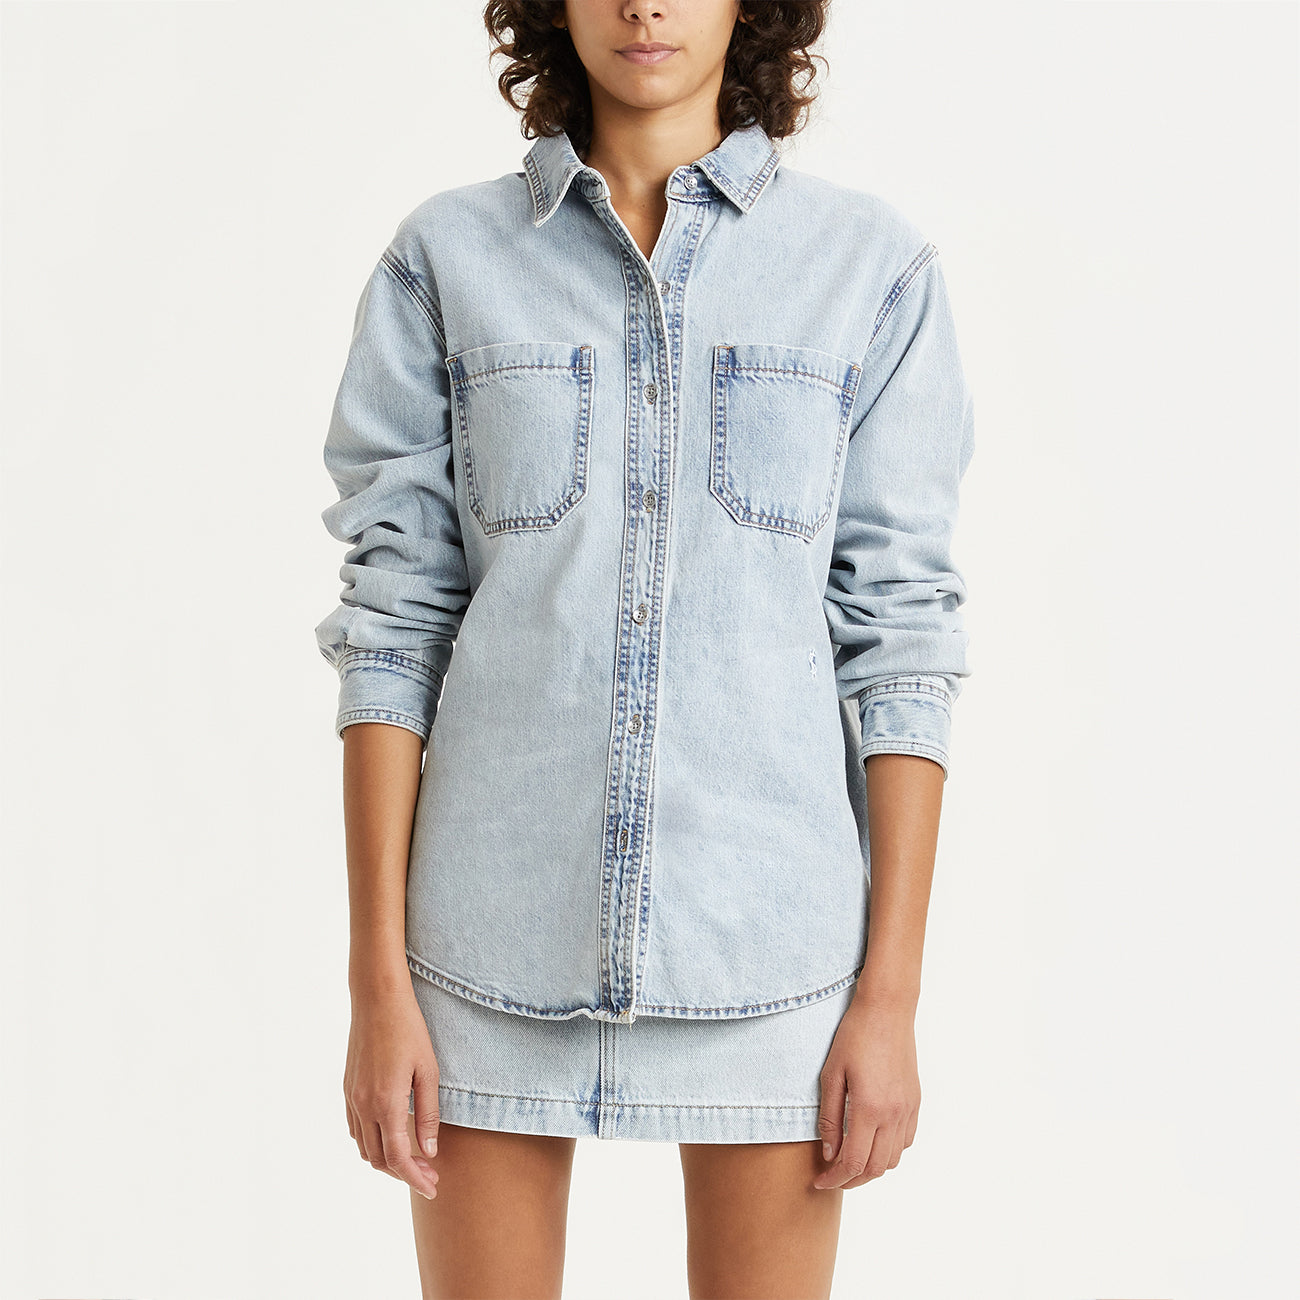 W WEST END SHIRT CHAMBRAY